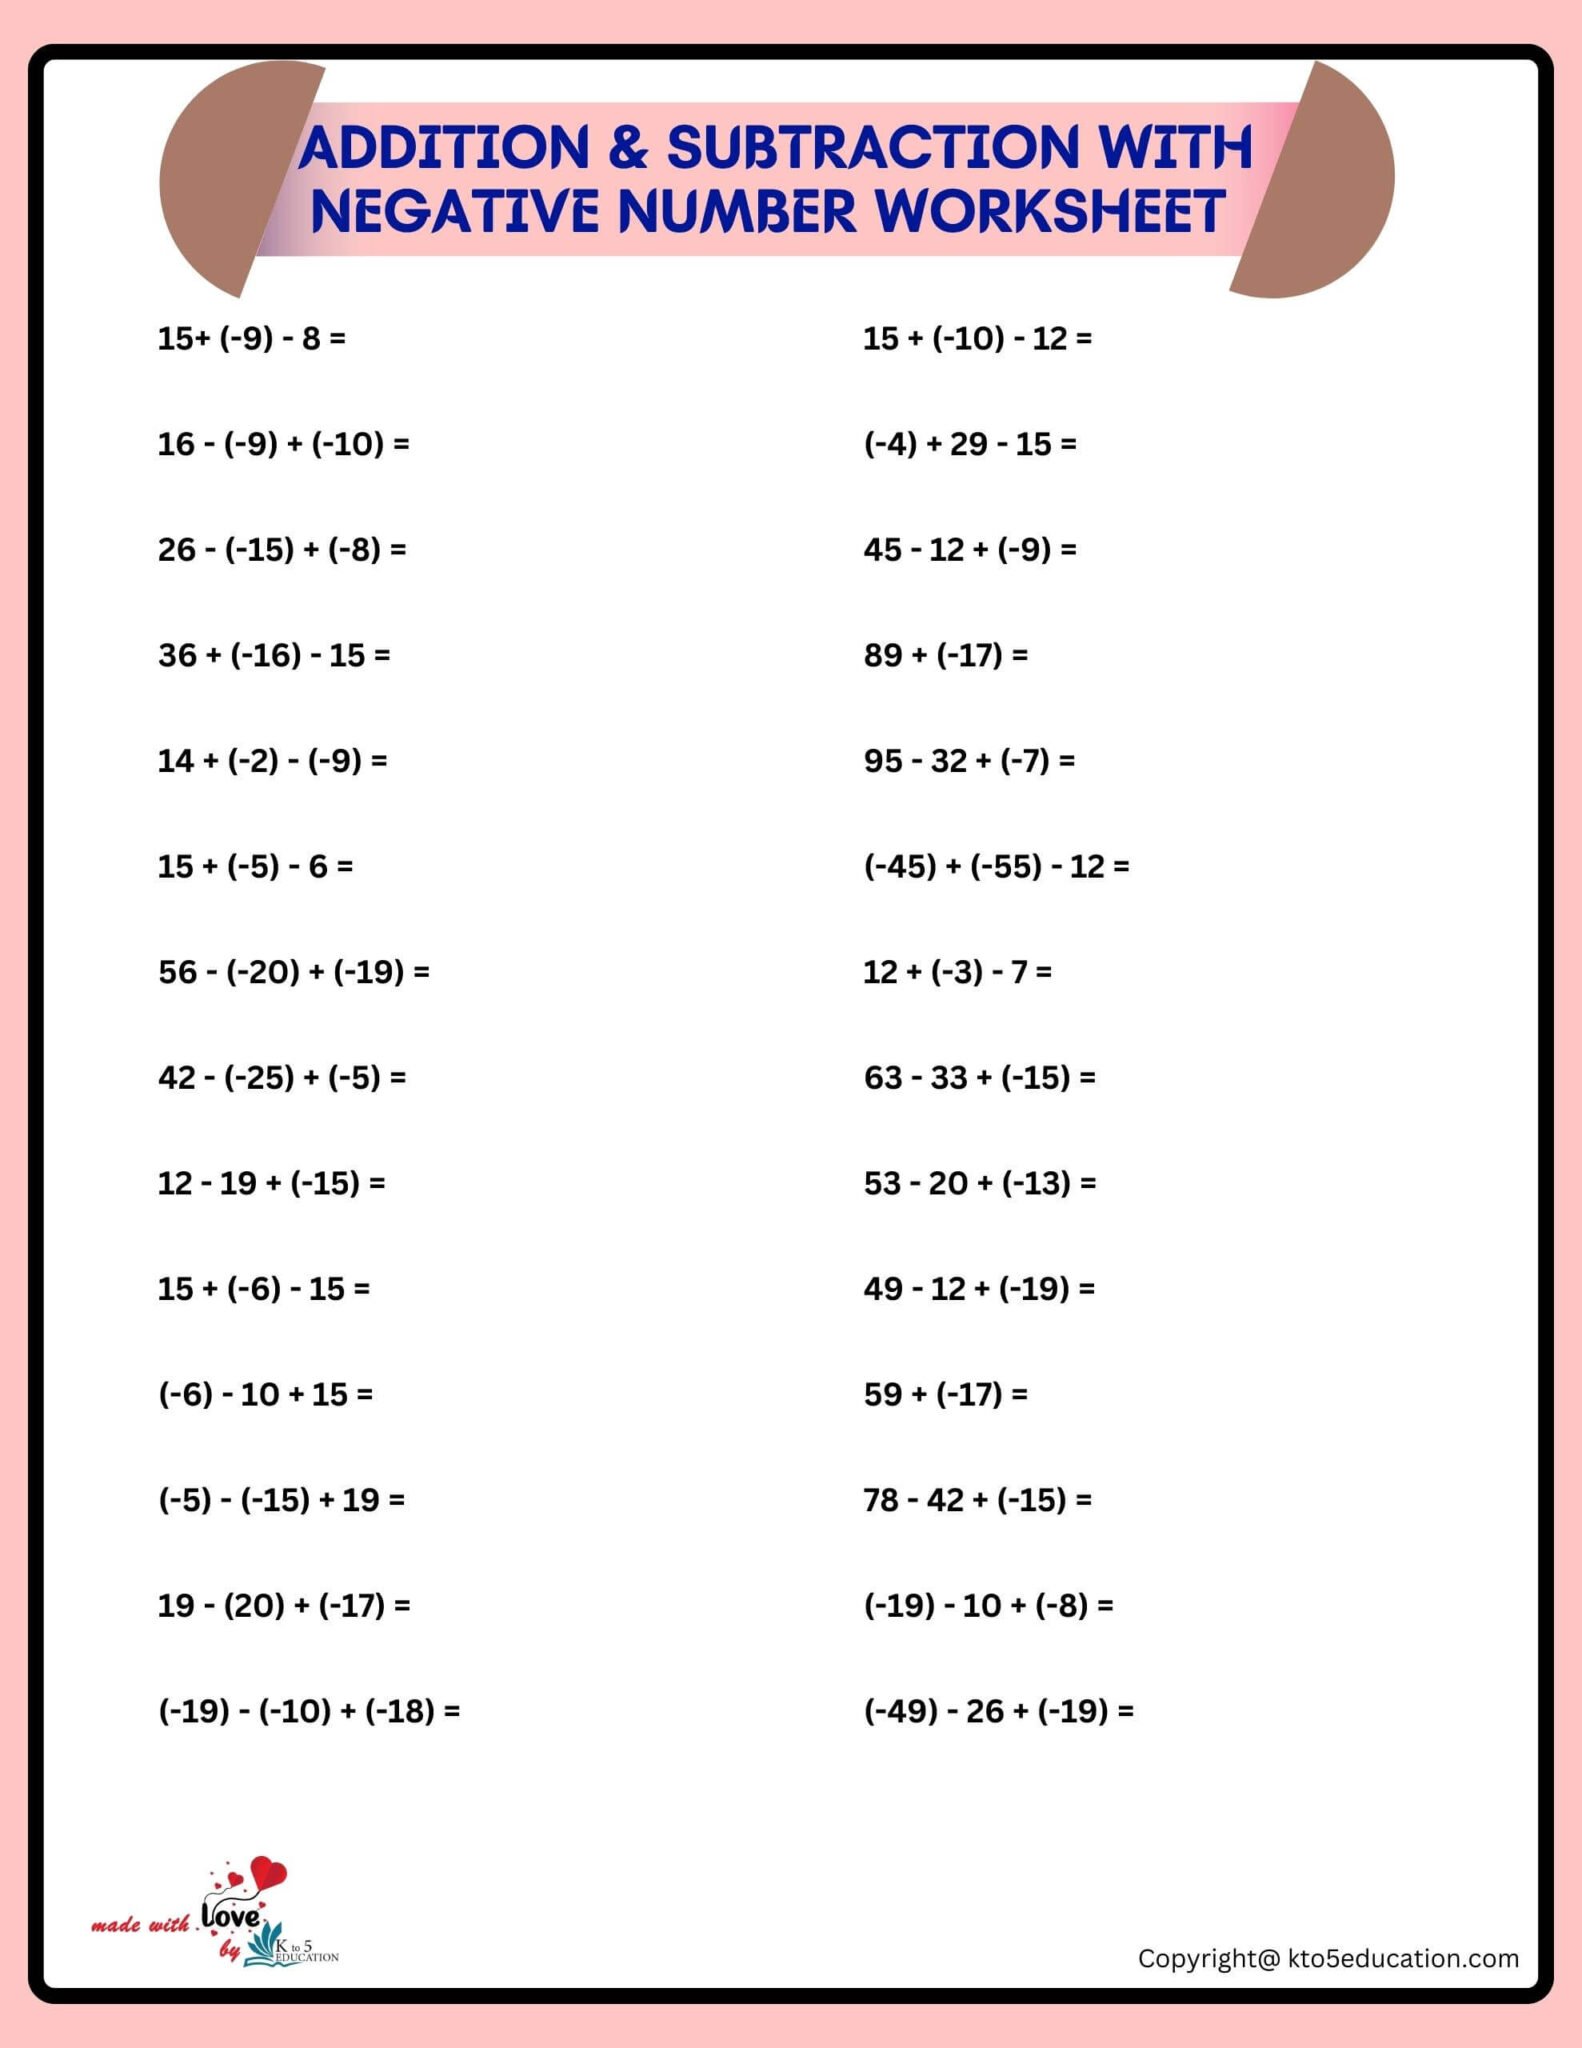 addition-and-subtraction-of-integers-worksheets-free